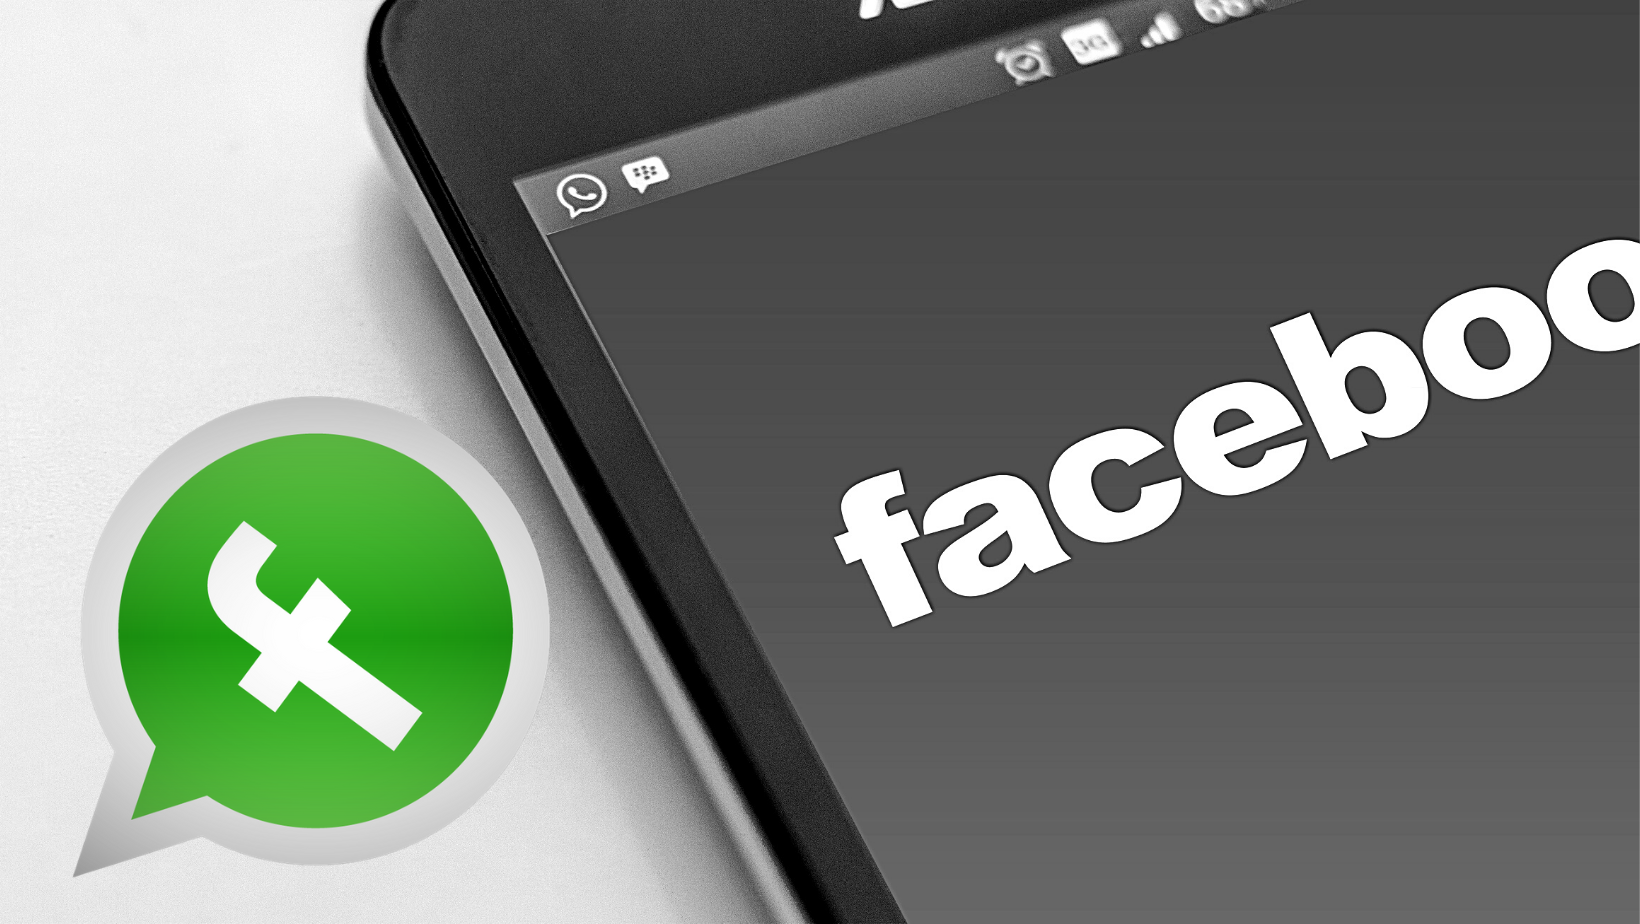 WhatsApp to share user data with Facebook for ad targeting — here’s how to opt out